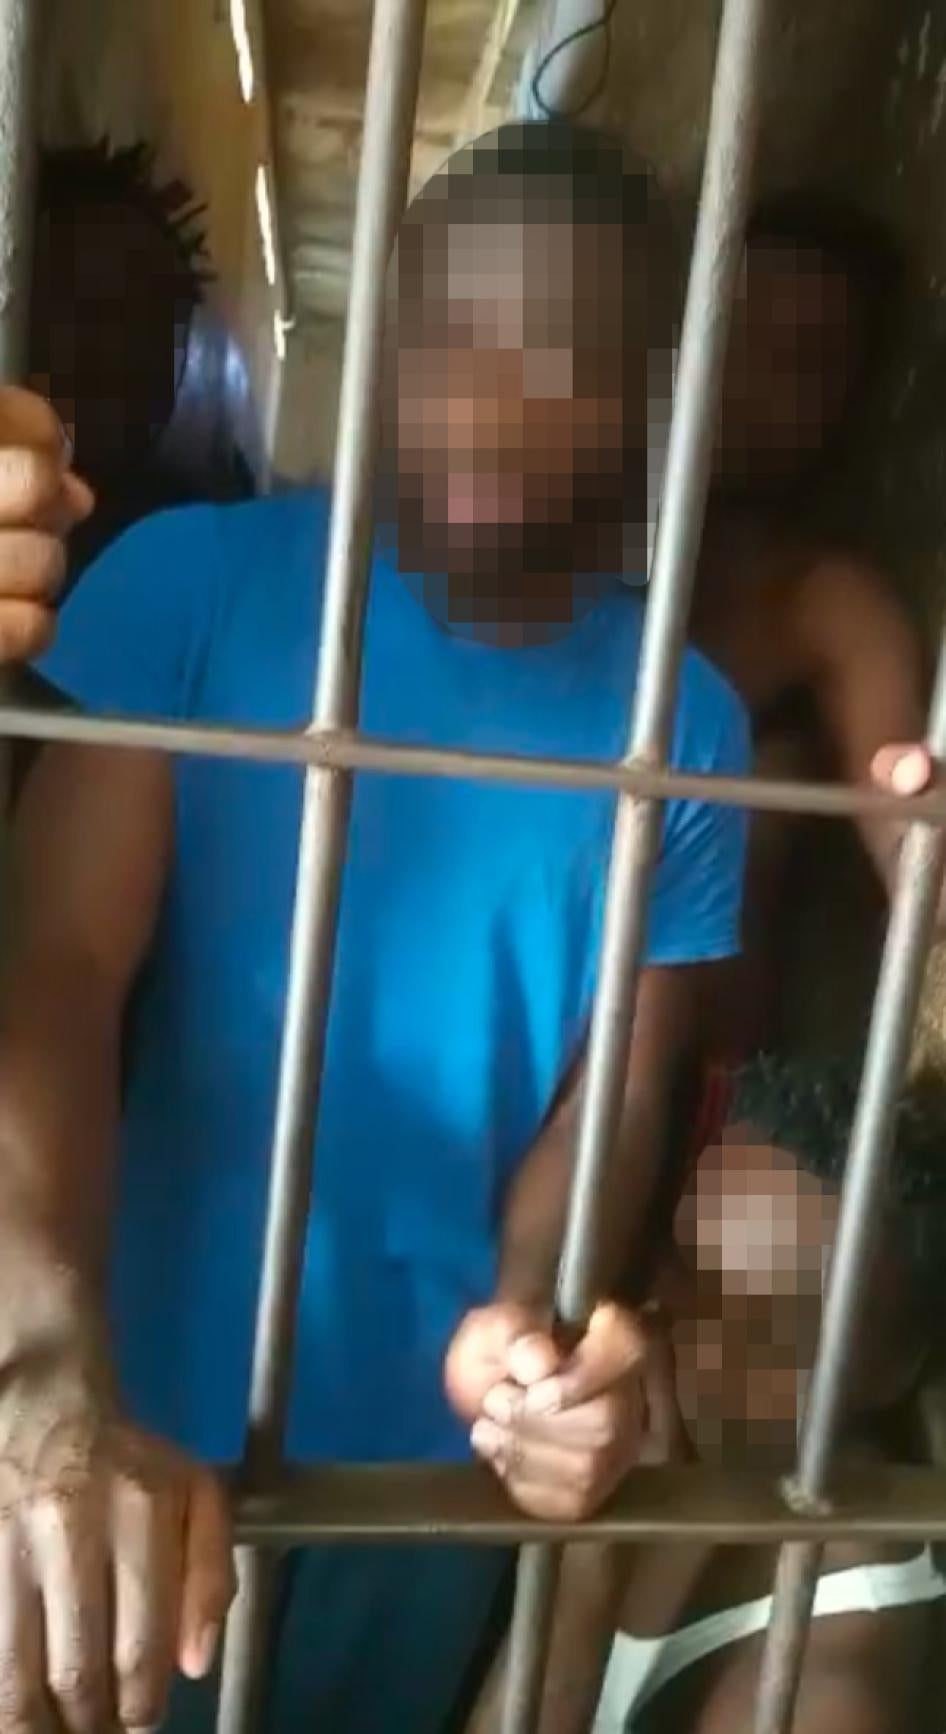 People behind bars with their faces blurred